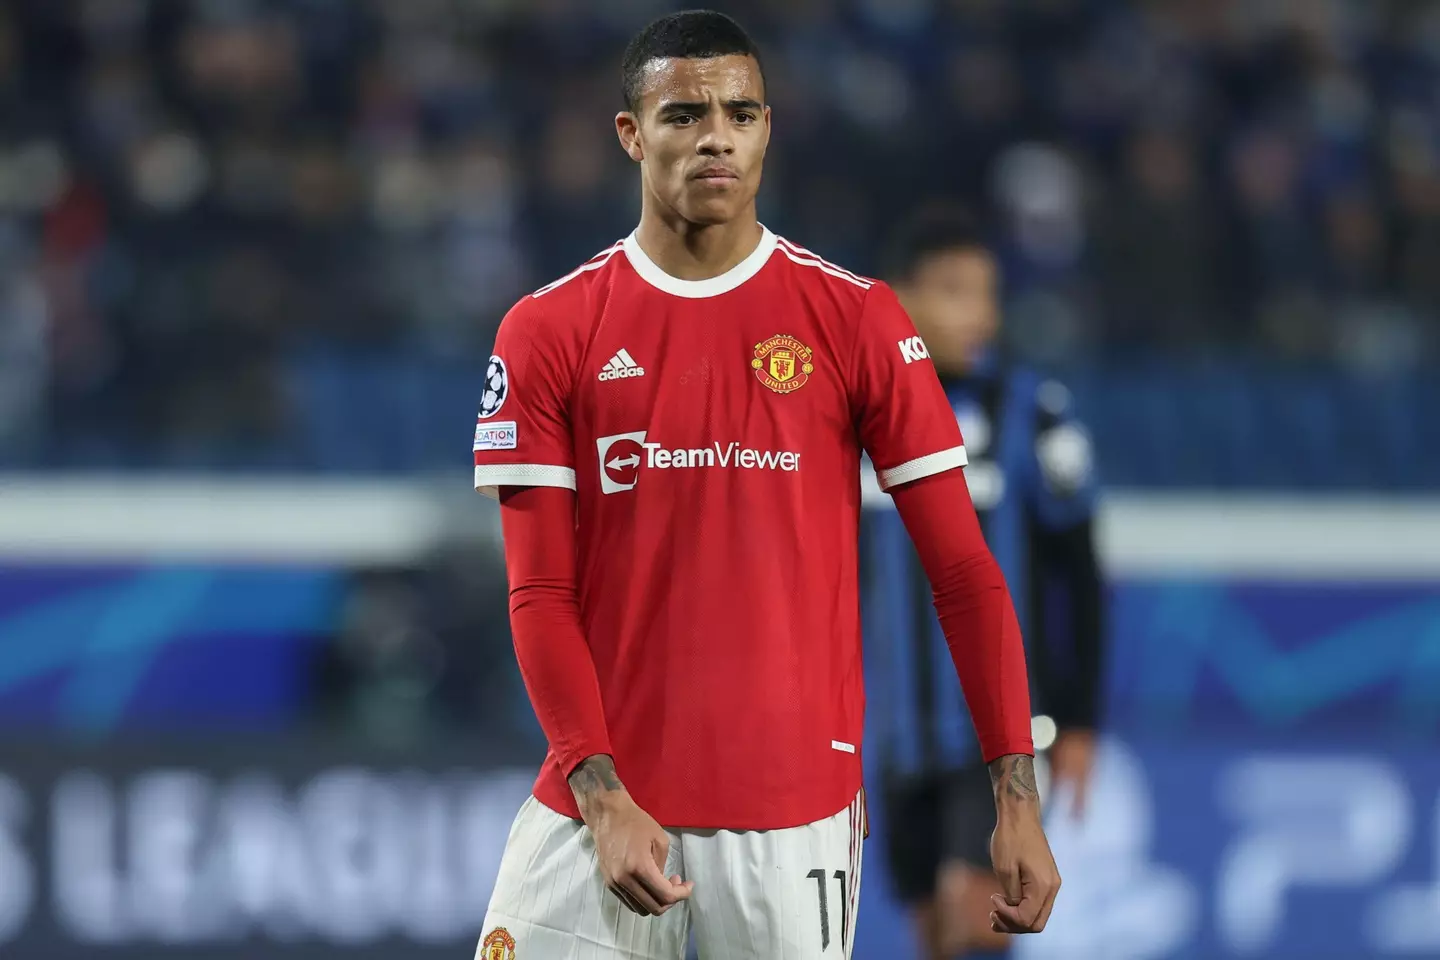 Mason Greenwood will no longer stand trial in November after all charges against him were dropped.